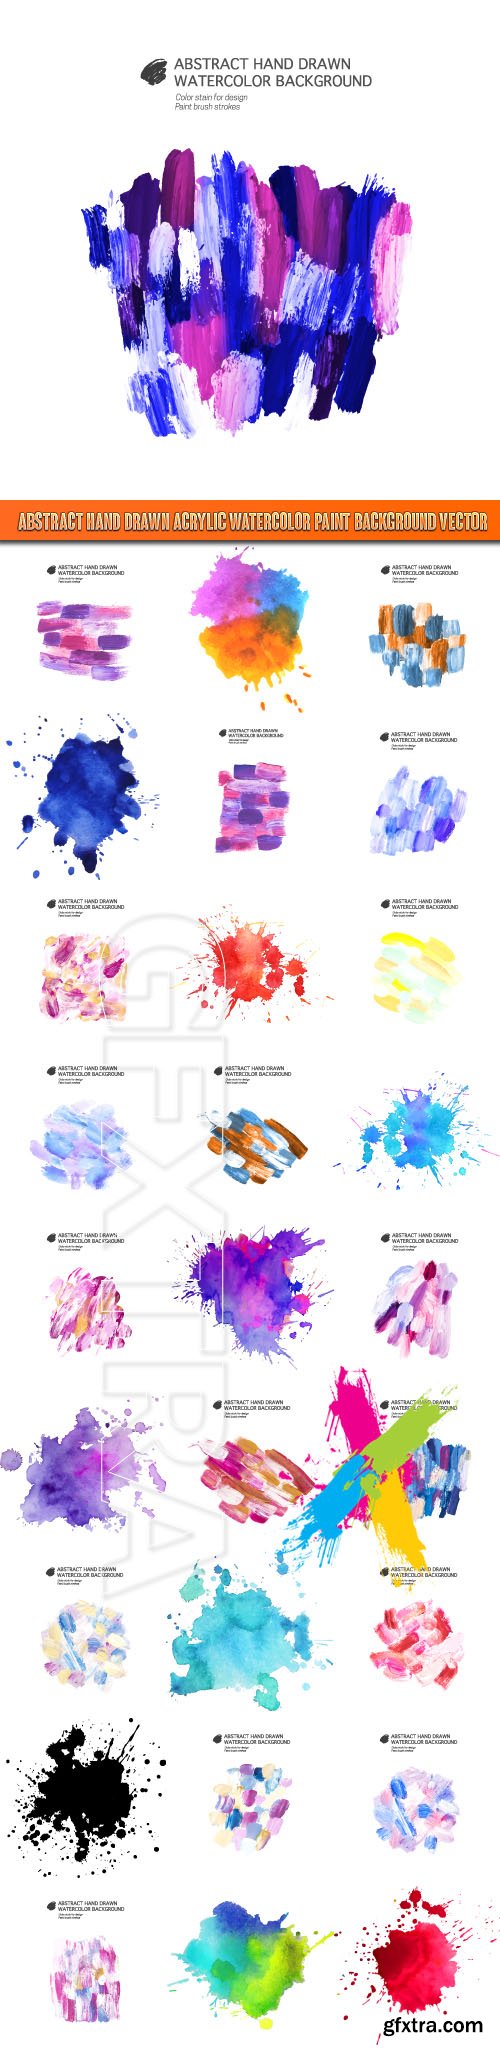 Abstract hand drawn acrylic watercolor paint background vector